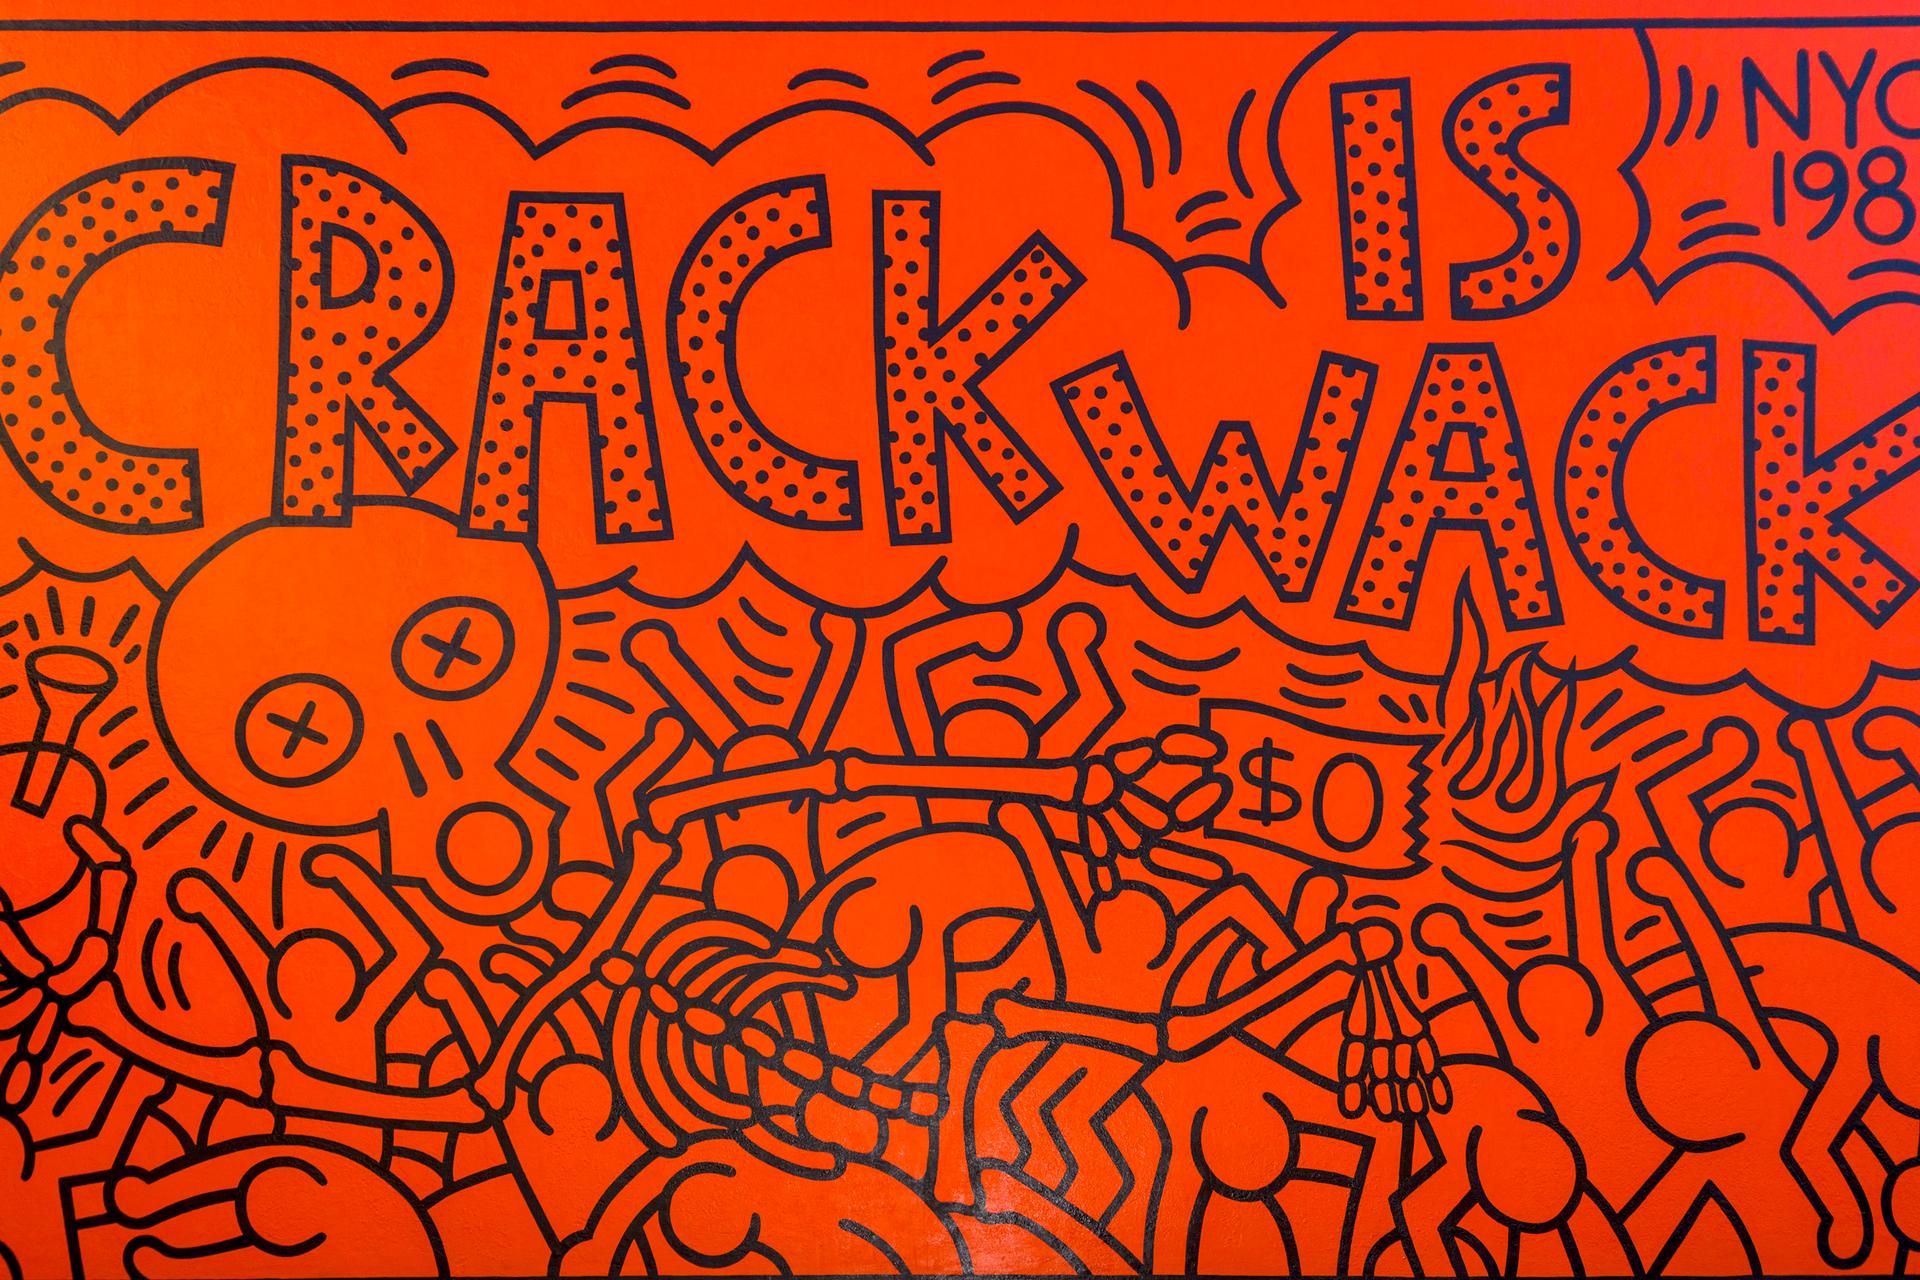 Crack Is Wack. Keith Haring artwork &copy; Keith Haring Foundation